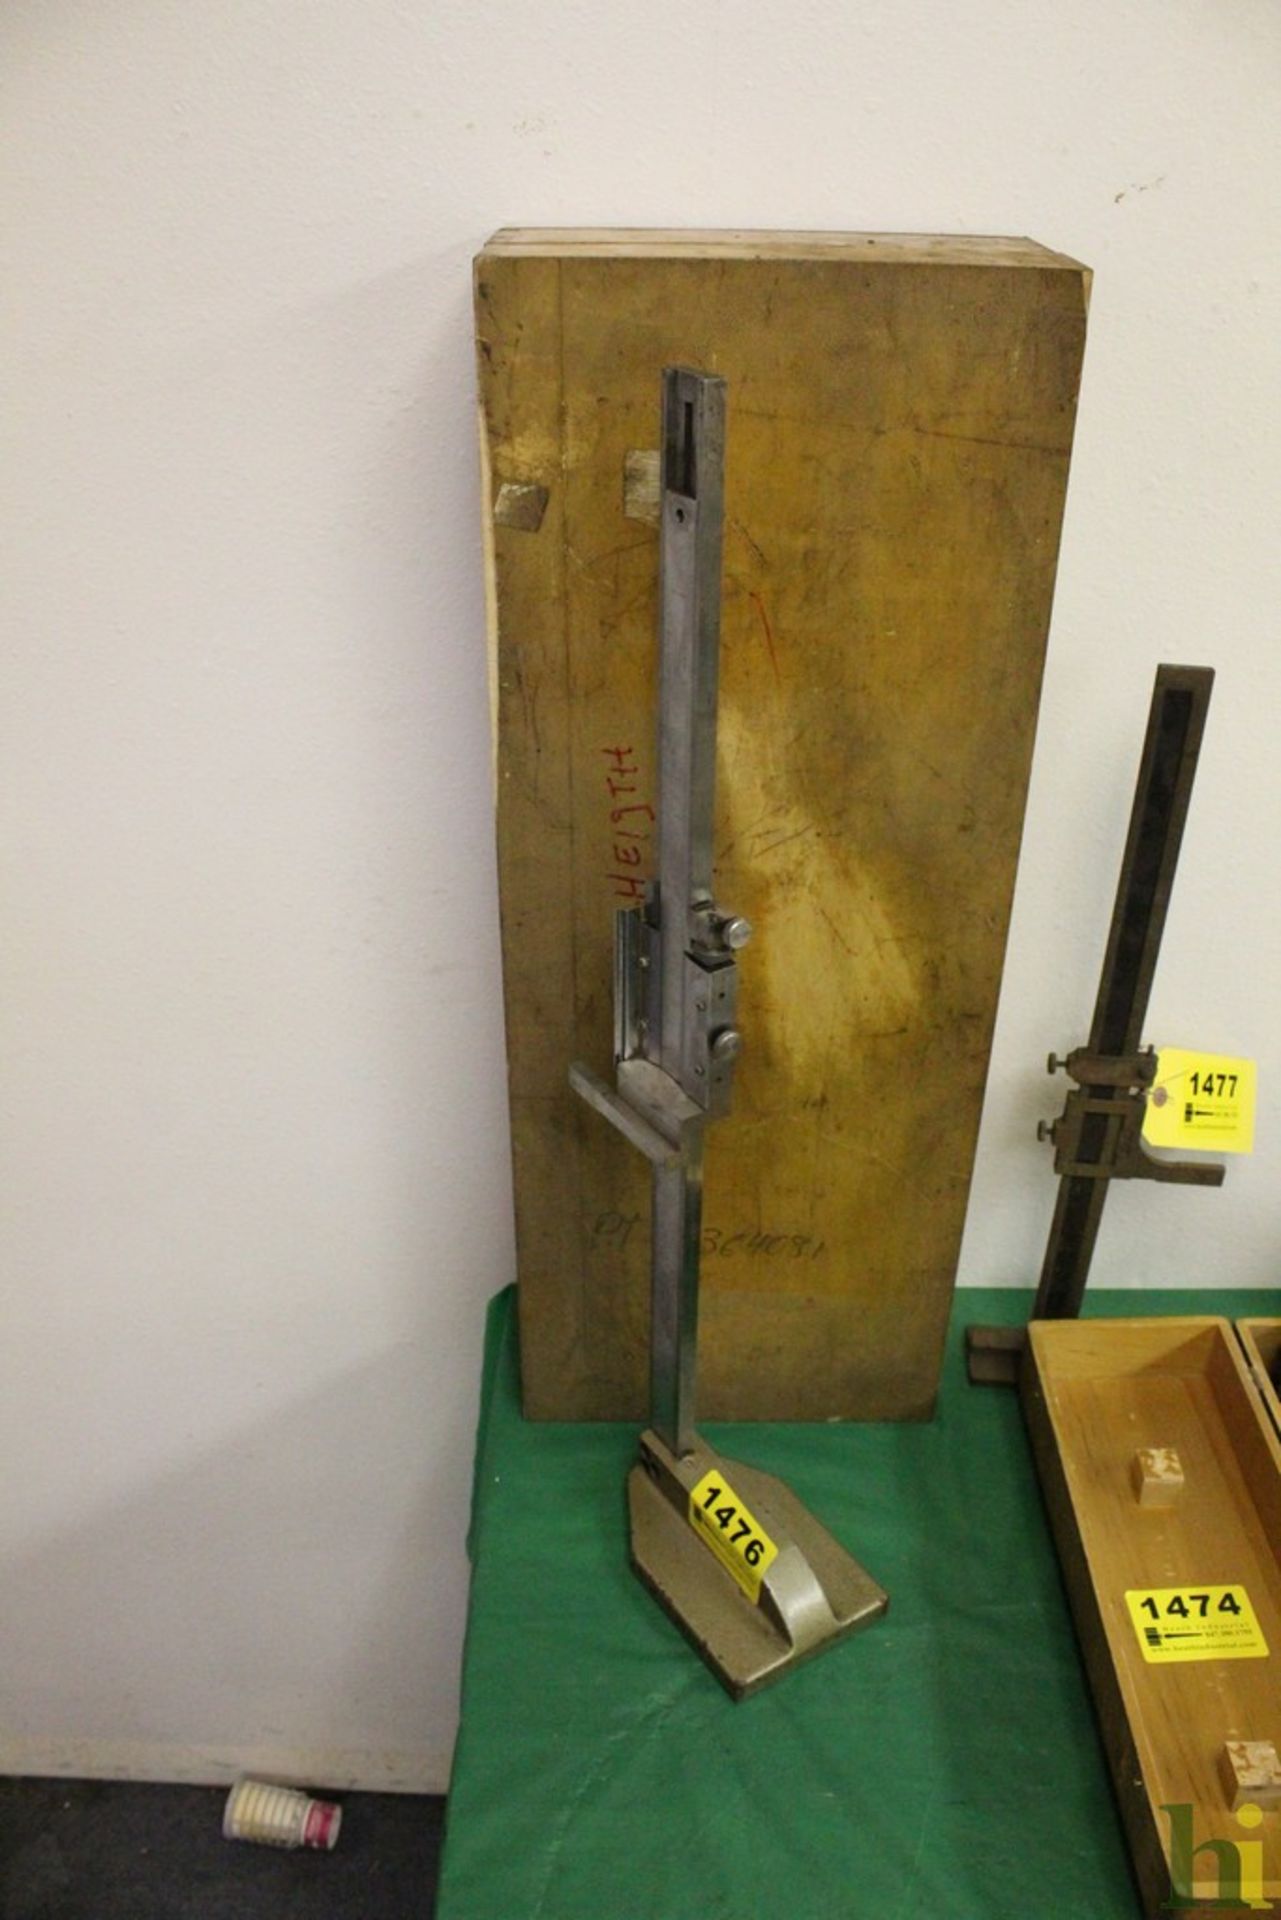 21" STAINLESS STEEL HEIGHT GAGE WITH WOOD CASE